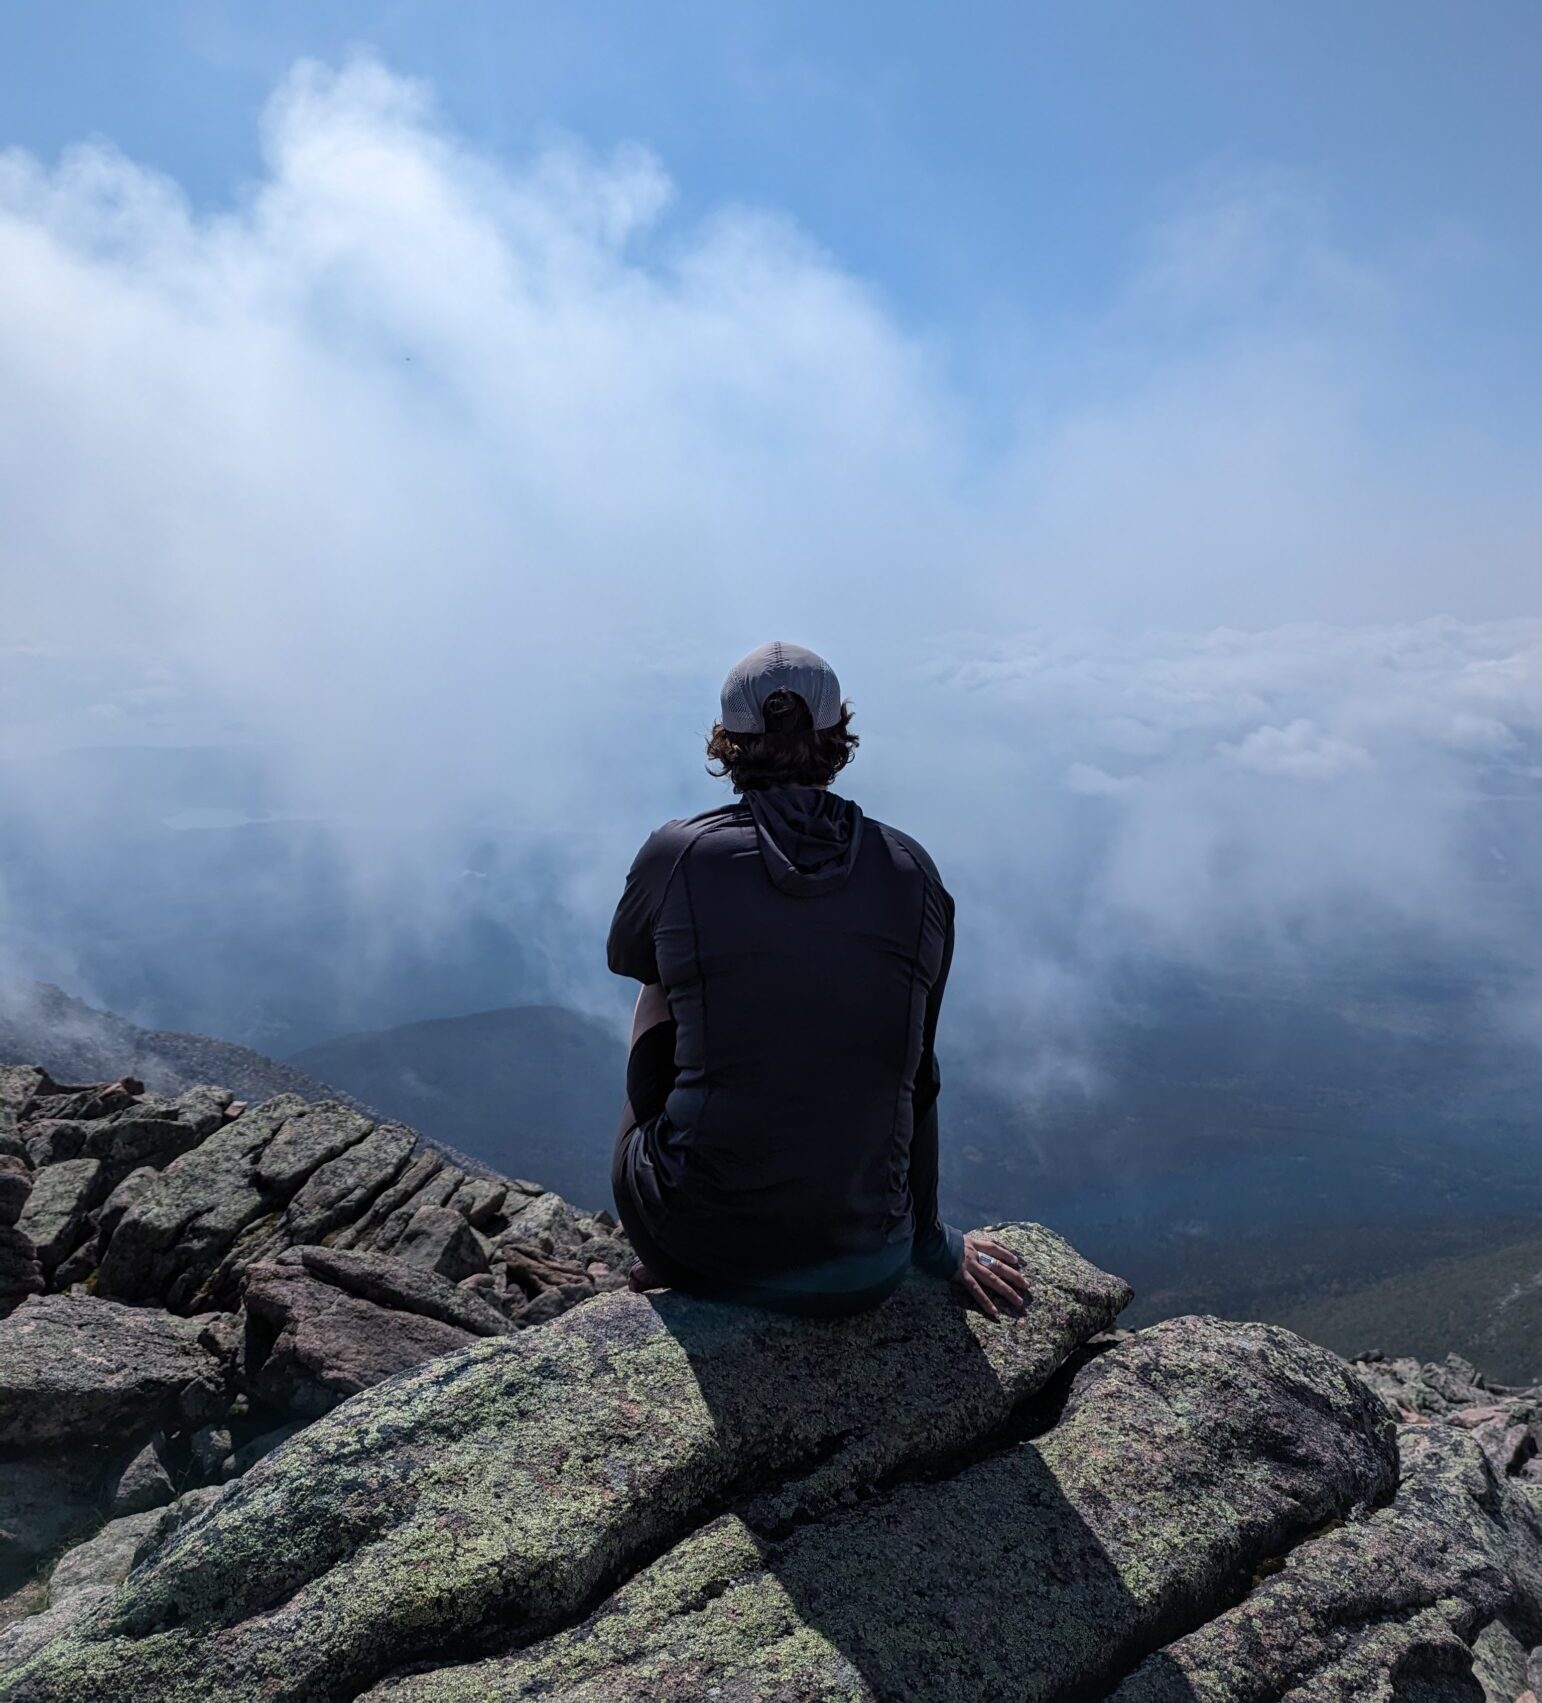 An Appalachian Trail hiker takes in the view from a high peak.